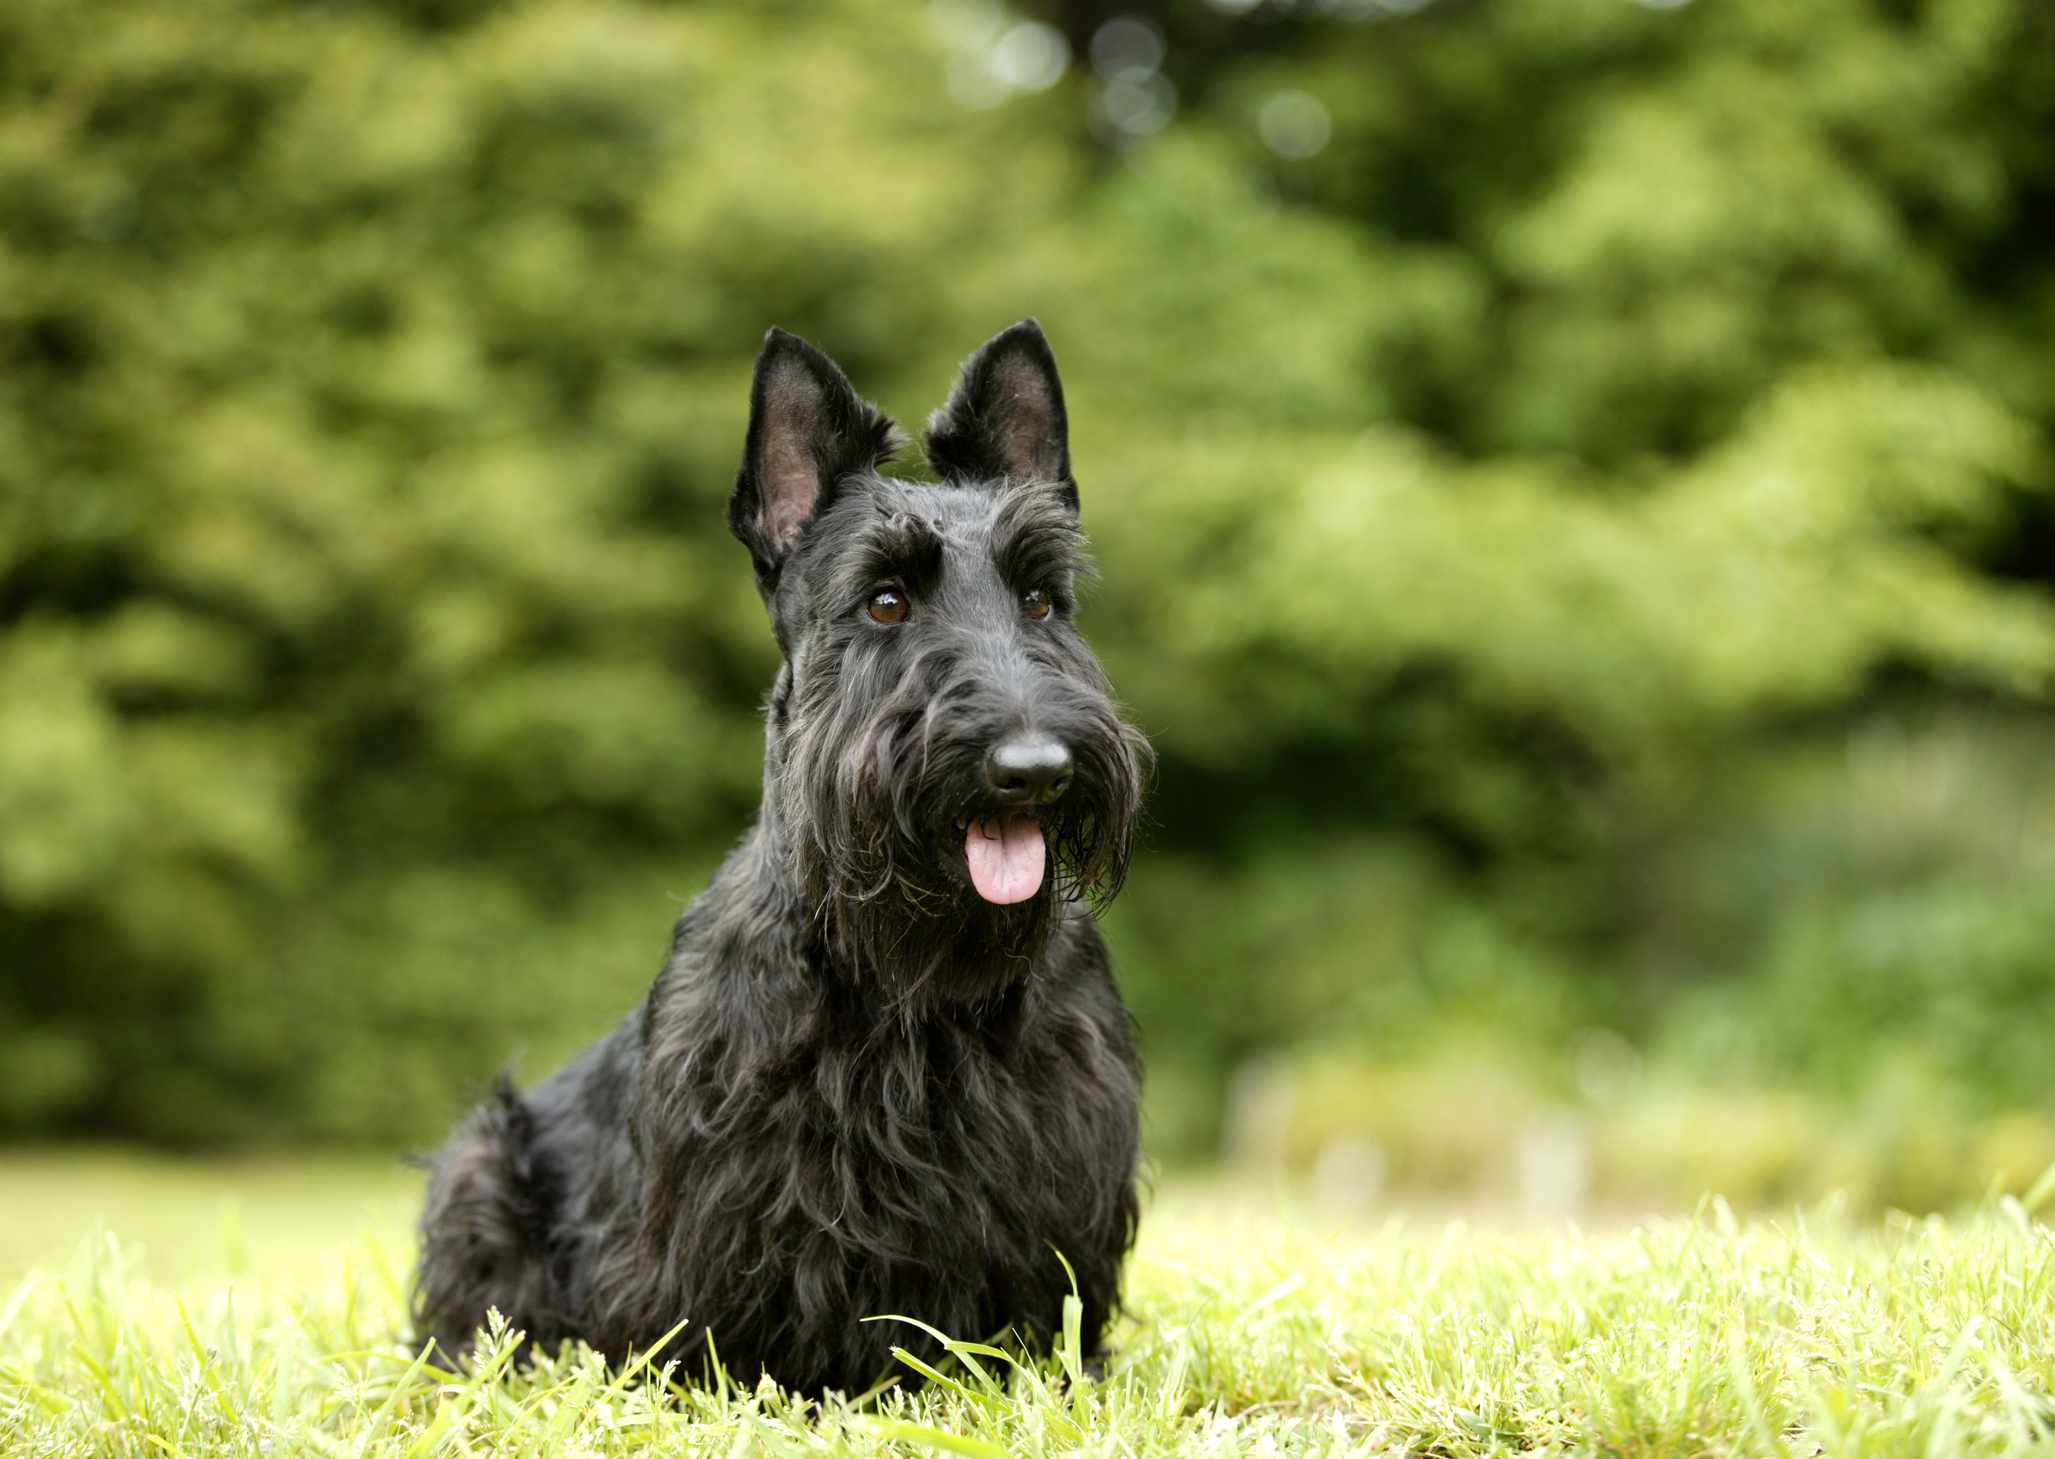 Scottish Terrier sitting on grass in front of trees